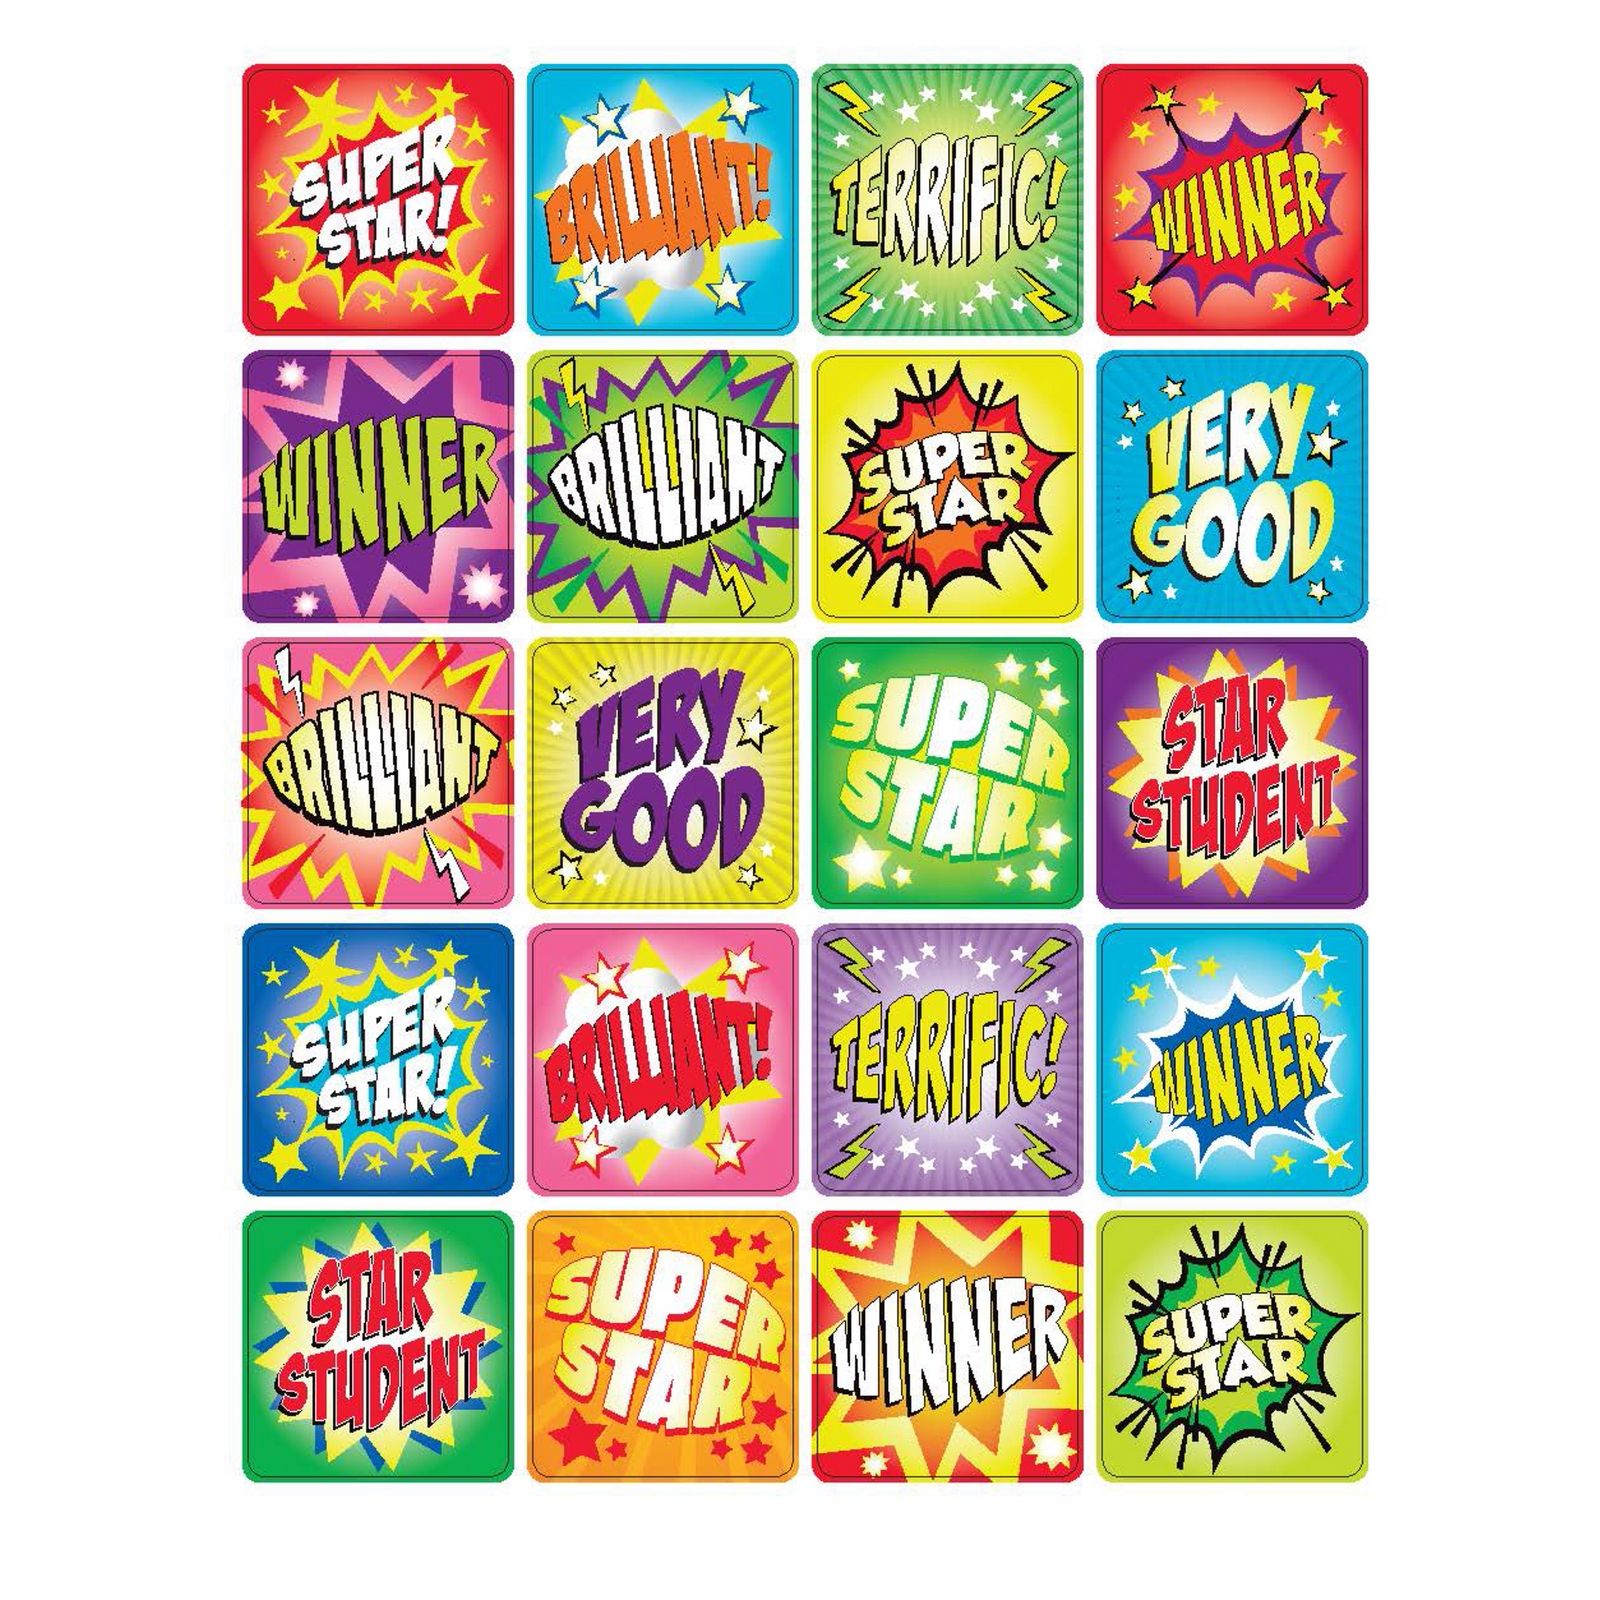 Star Square Stickers 25mm